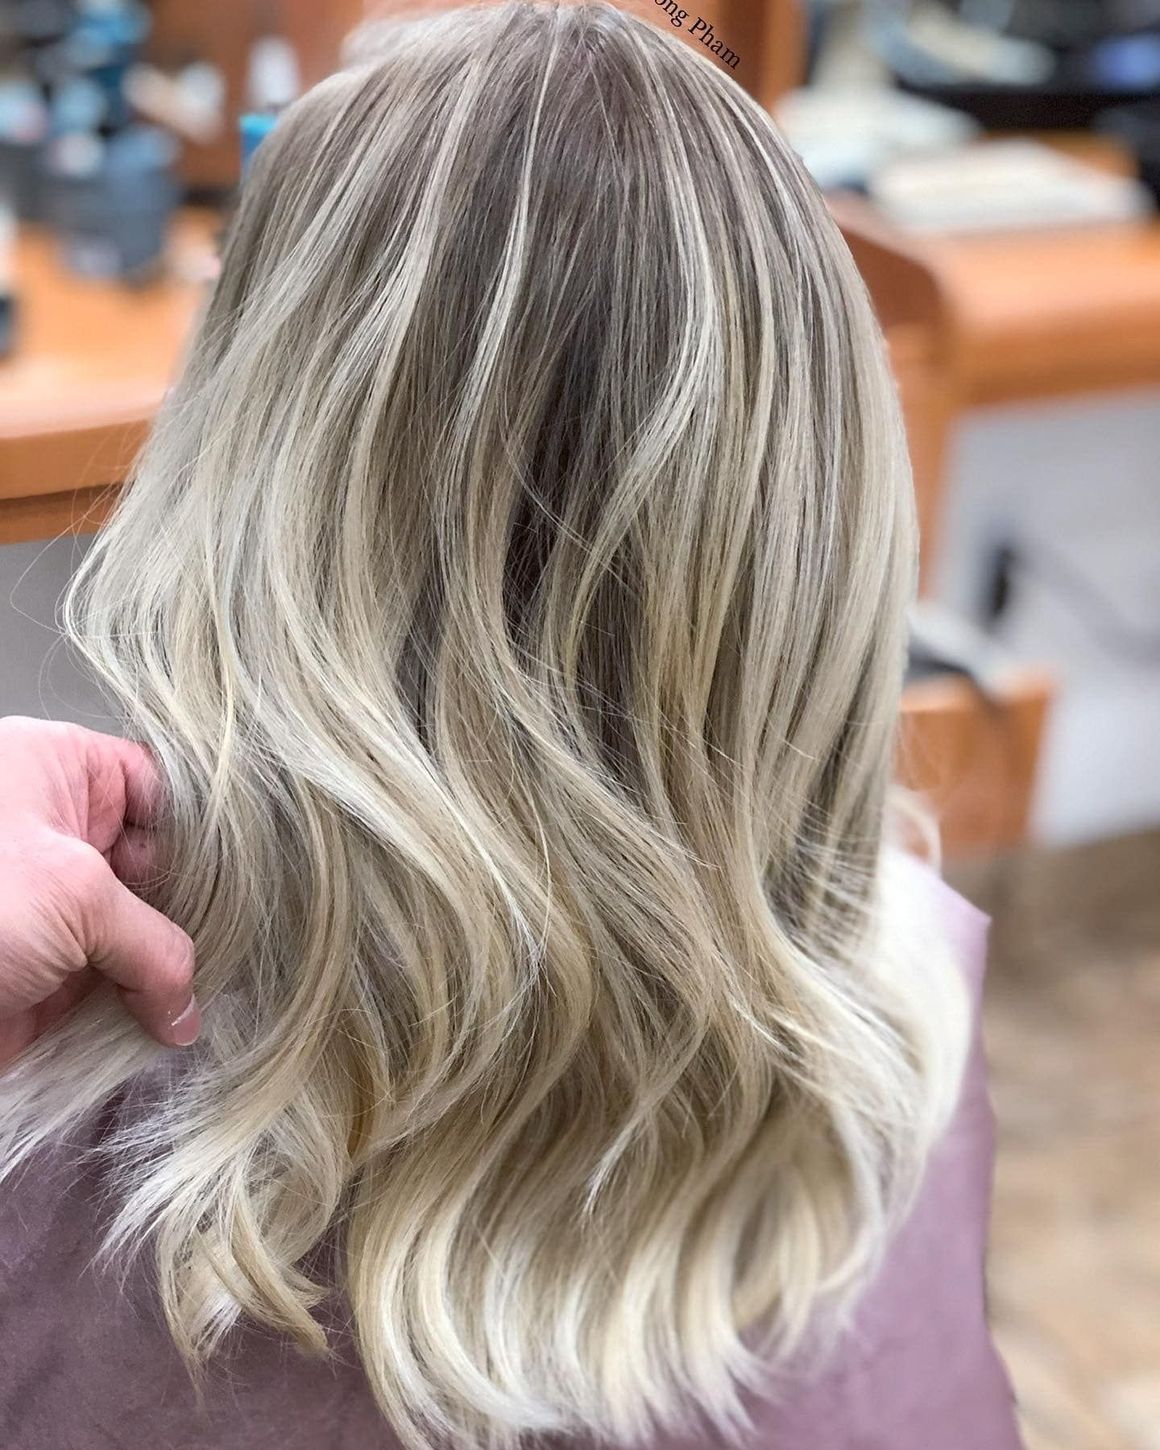 a woman with long blonde hair is getting her hair cut by a hairdresser .